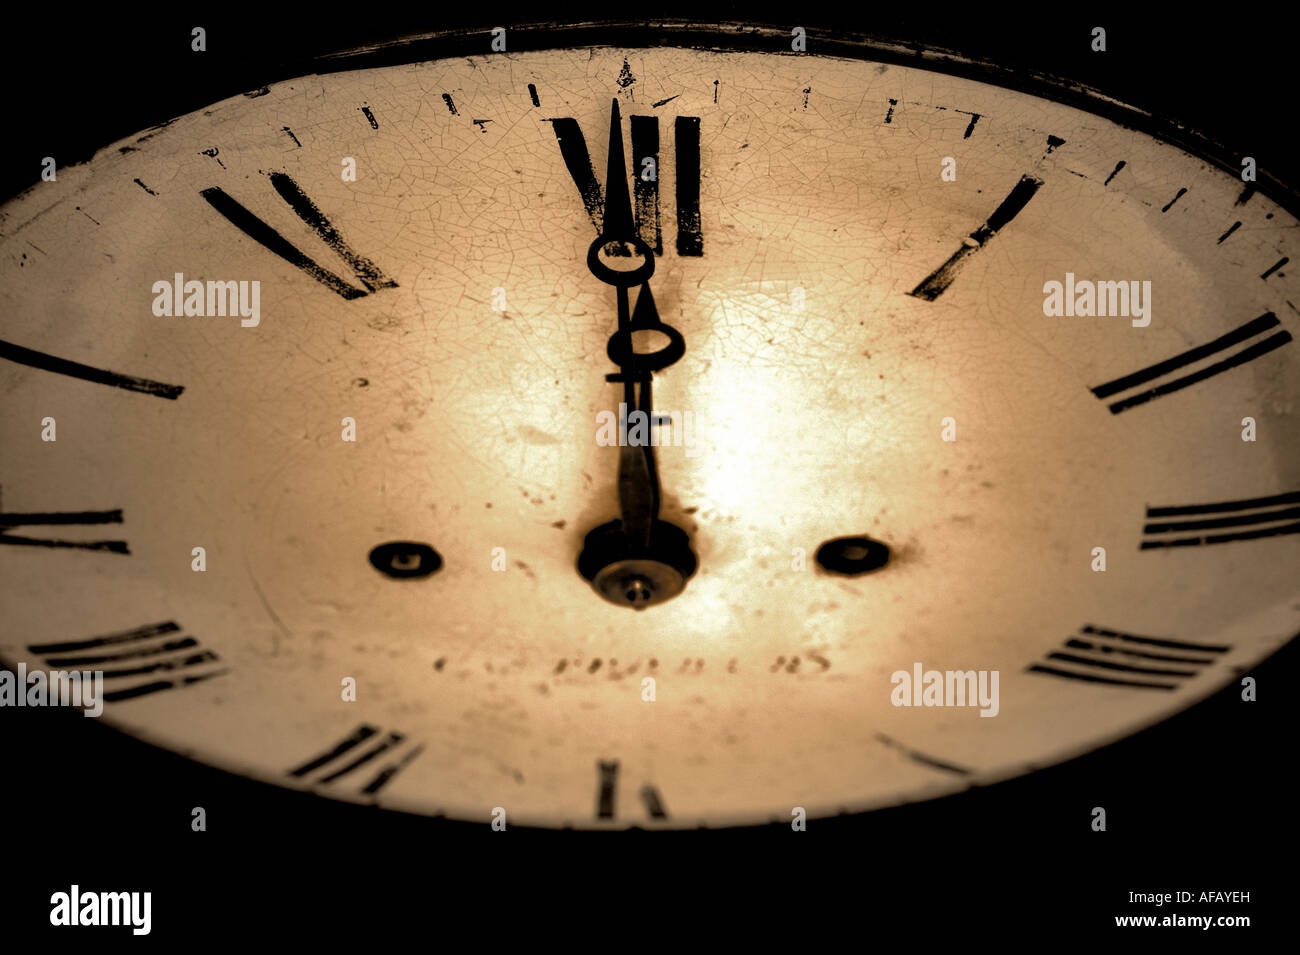 Antique clock face with the hands at 12 o clock dark and grainy sepia toned image Stock Photo